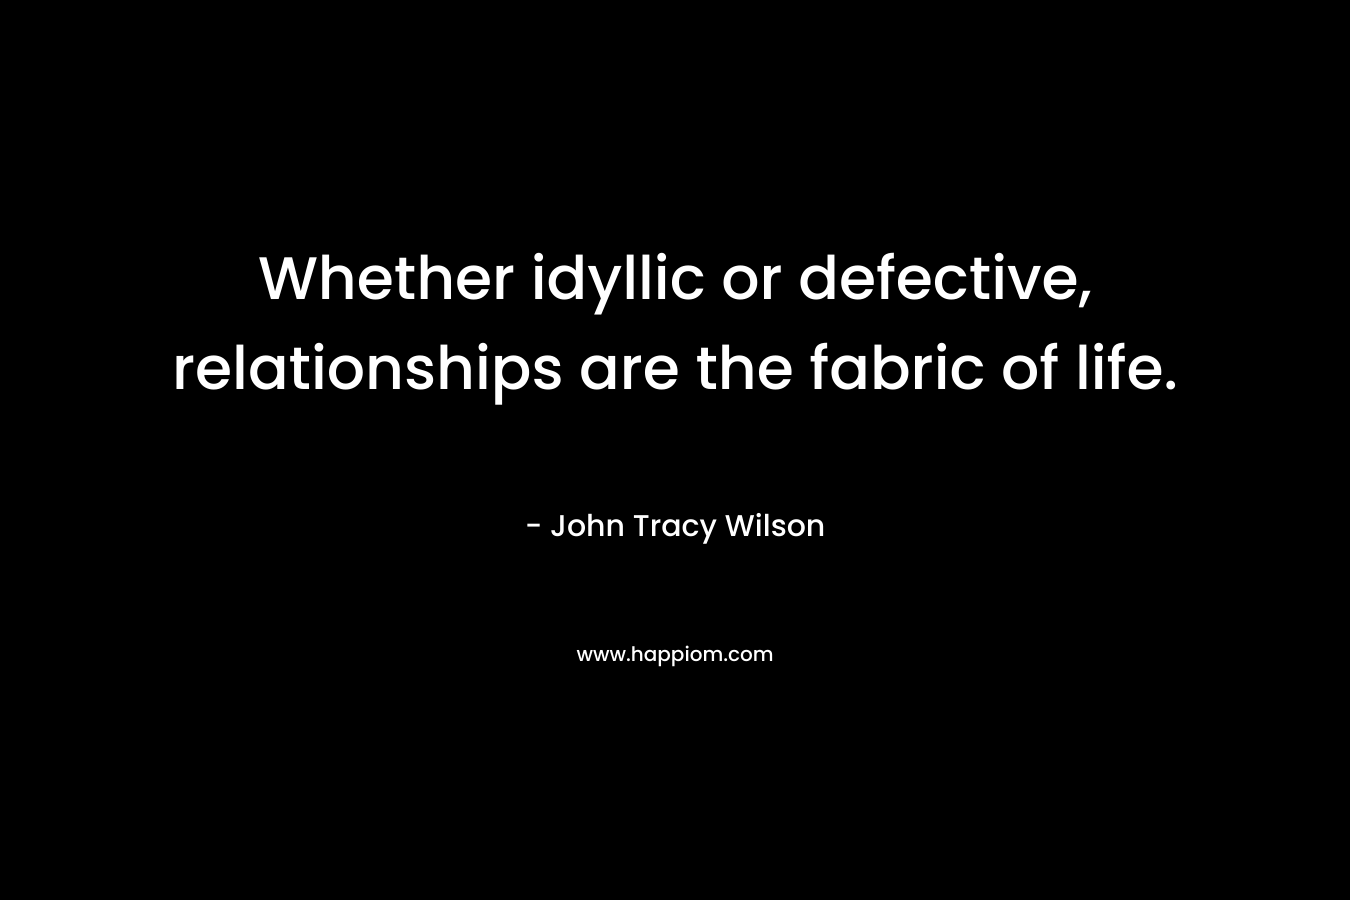 Whether idyllic or defective, relationships are the fabric of life.